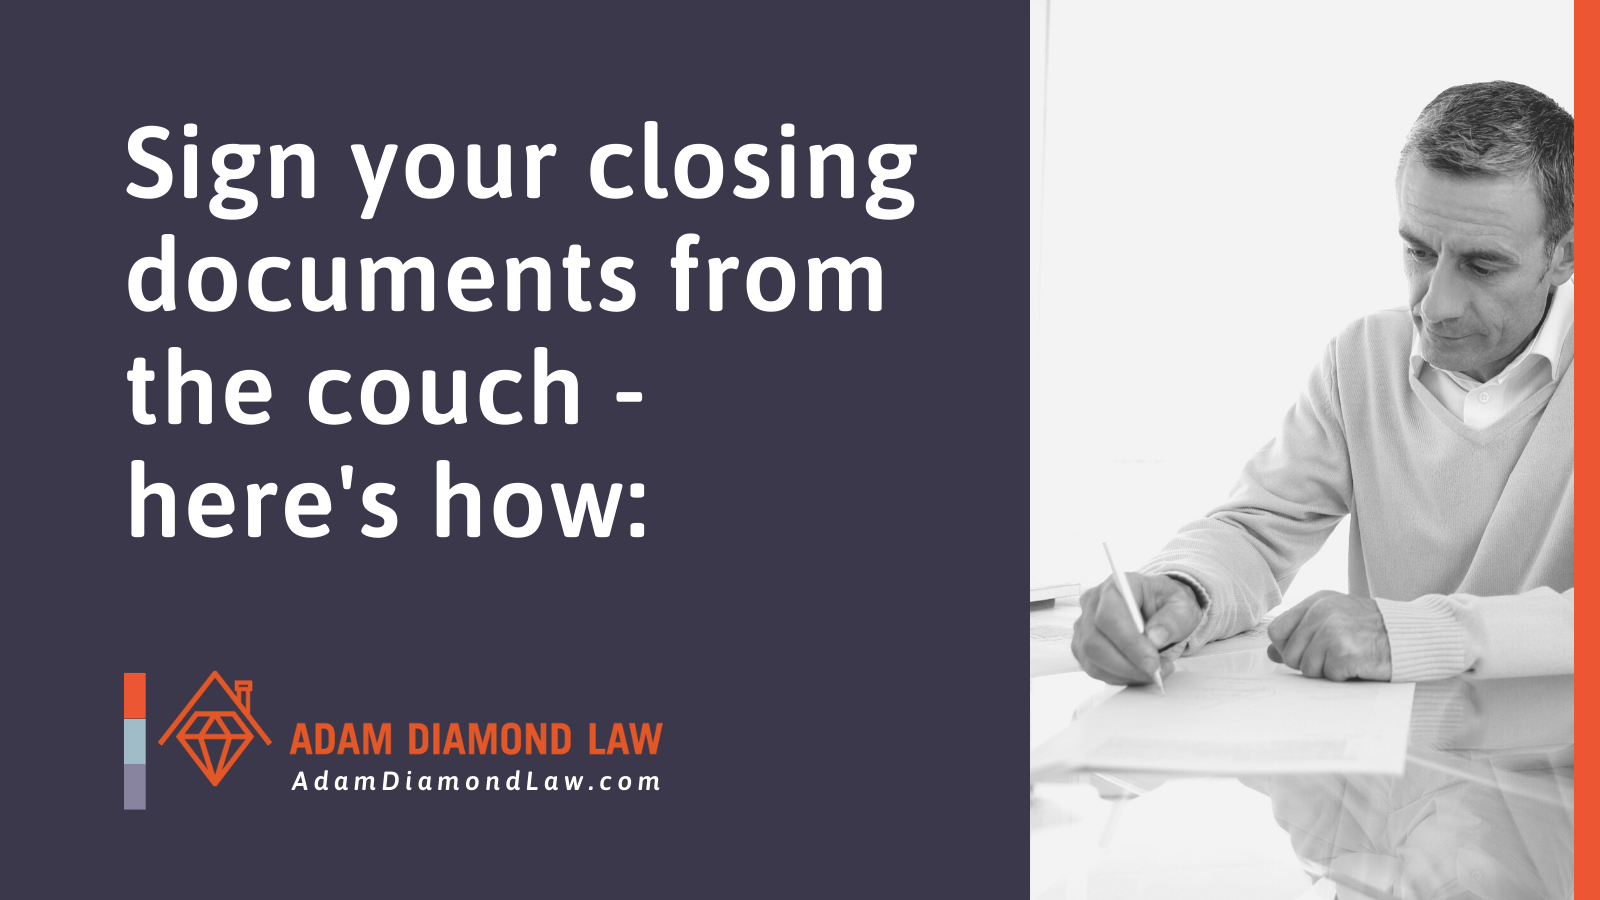 Sign your closing documents from the couch - Adam Diamond Law | McHenry, IL Residential Real Estate Lawyer